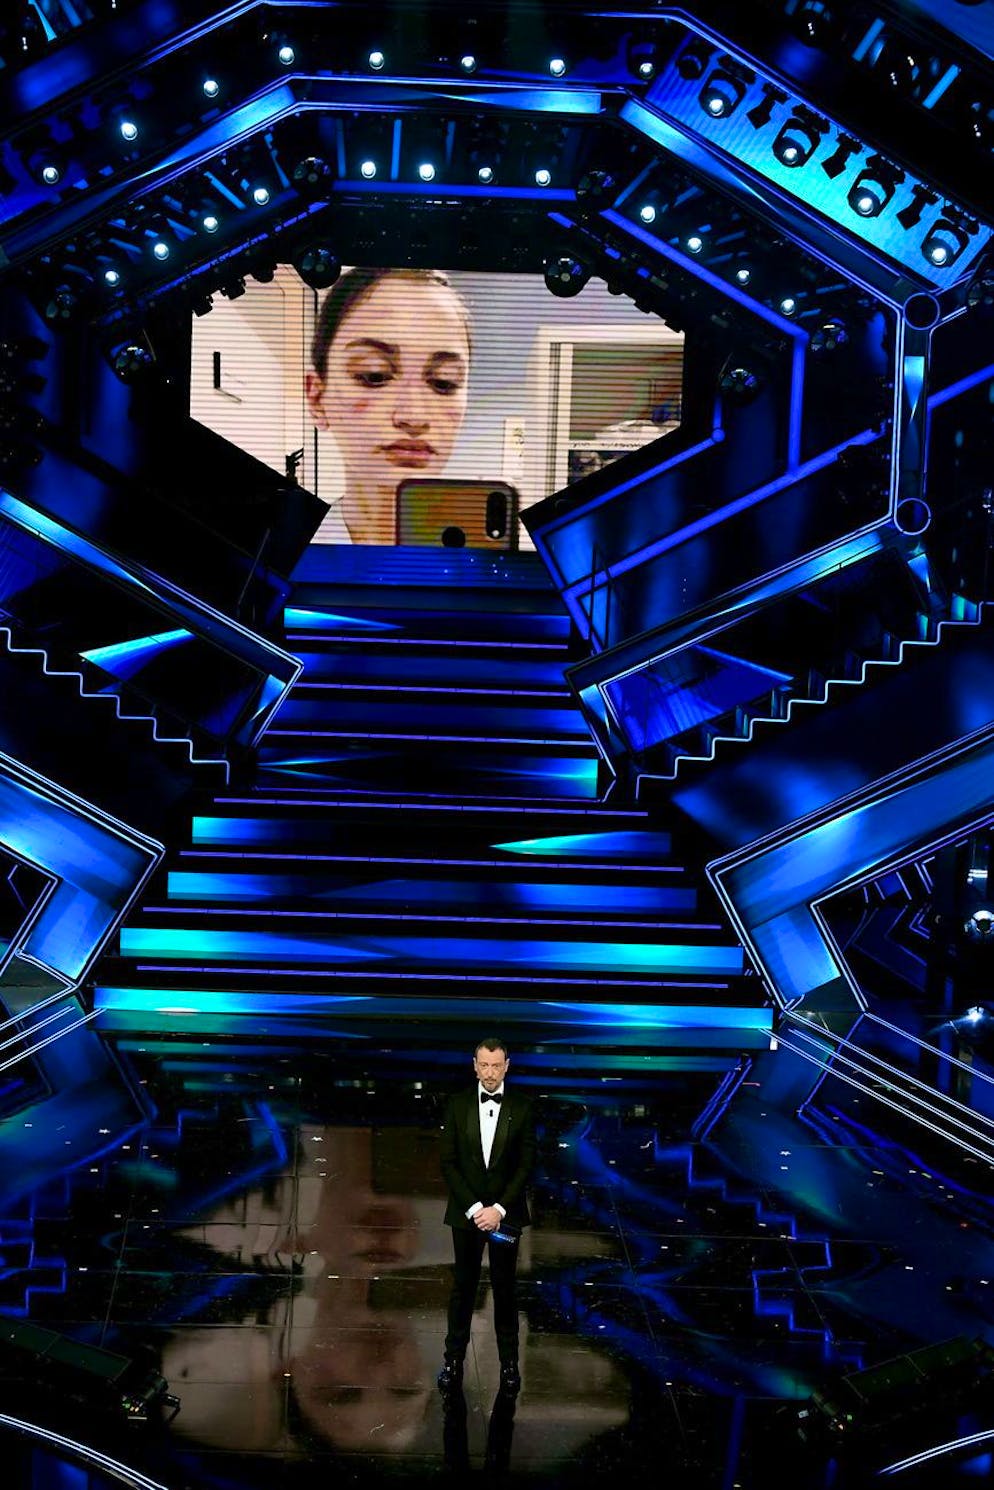 epa09047498 Sanremo Festival host and artistic director, Amadeus introduces Alessia Bonari, on the stage of the Ariston theatre during the 71st Sanremo Italian Song Festival, Sanremo, Italy, 02 March 2021. The festival runs from 02 to 06 March 2021. Bonari is a nurse of a hospital in Milan who became a symbol of the fight against COVID-19 when a photo of her (seen in background), taken at the beginning of March with the lockdown just started, showed her swollen face from wearing a protective mask during a very long shift, went viral on the Internet. EPA/ETTORE FERRARI